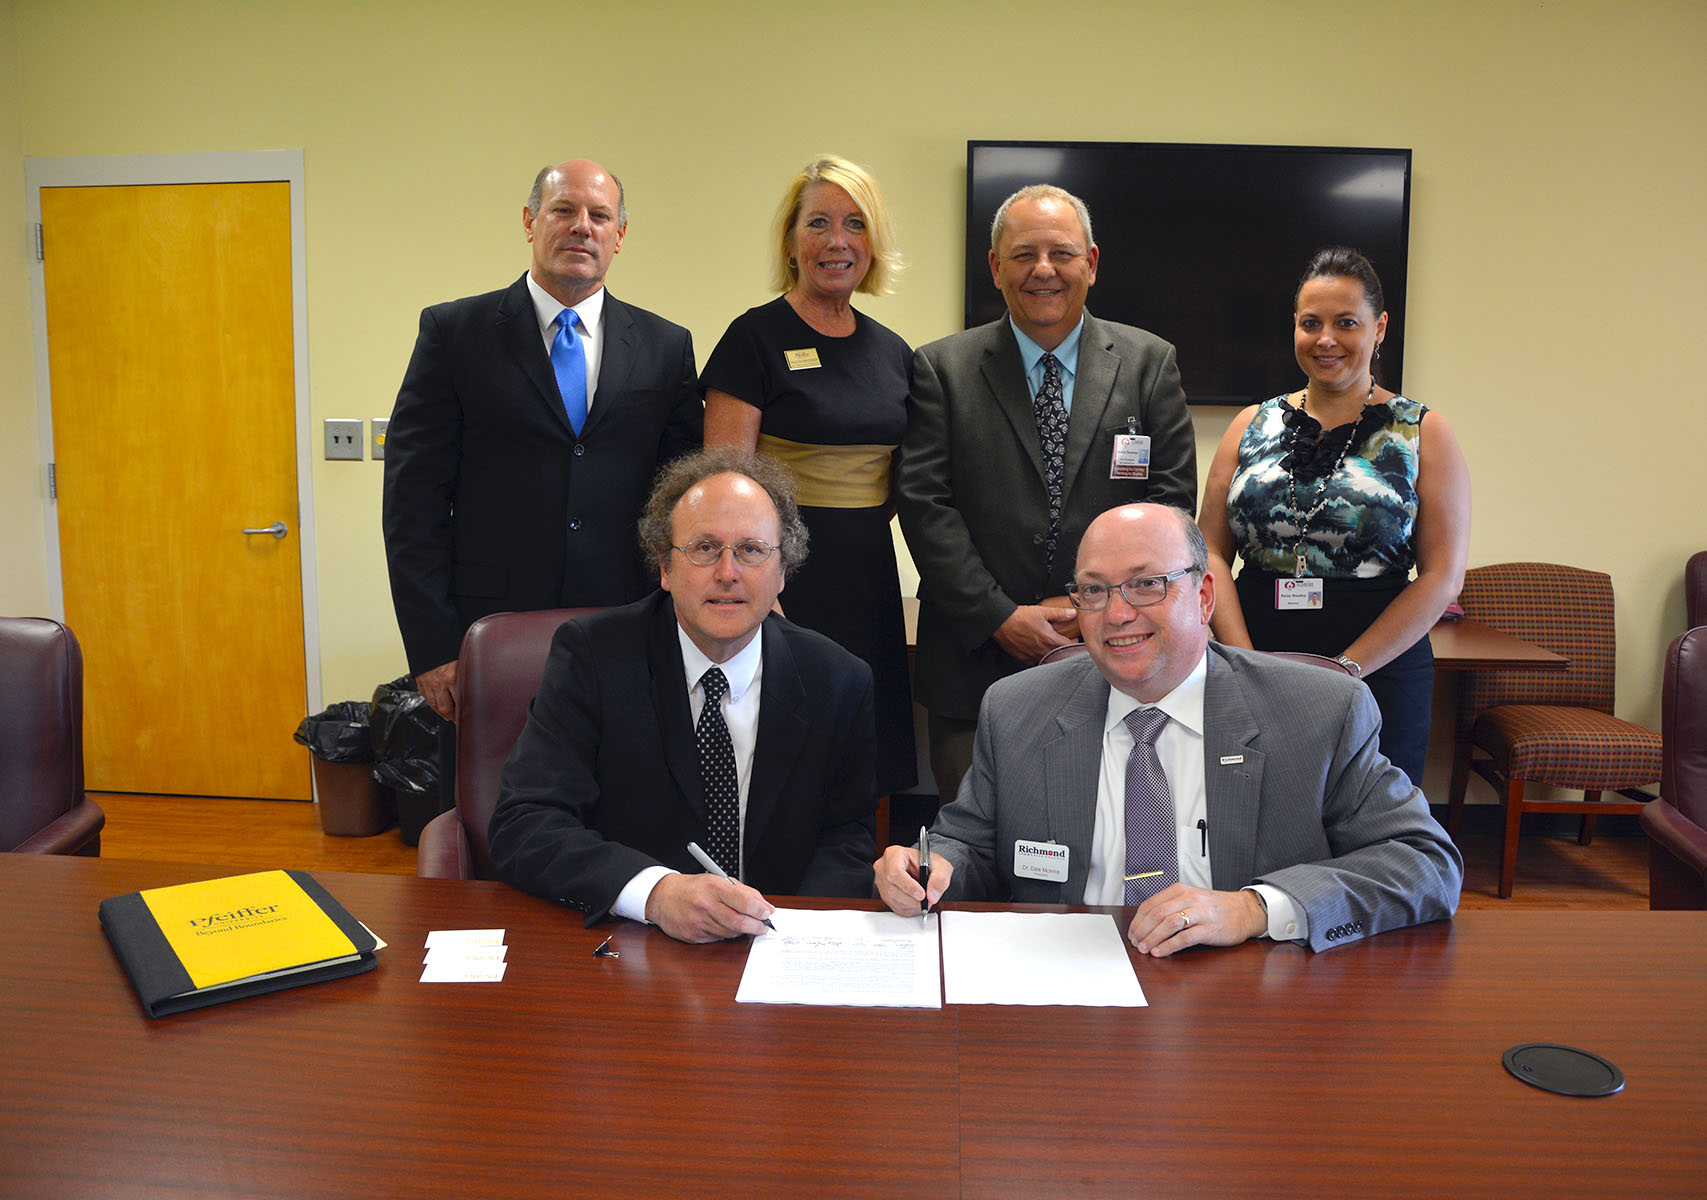 Administrators from Pfeiffer University recently visited Richmond Community College to sign an articulation agreement that establishes several transfer tracks for RCC students. Pictured are seated, from left, Dr. Mark McCallum, associate vice president for Academic Affairs, associate provost and chair Department of Biology, and Dr. Dale McInnis, president of RCC; standing, from left, Jeff Mincey, Pfeiffer’s assistant director of Admissions for Marketing and Community Engagement; Dr. Paulita Brooker, dean of Continuing Education and Adult Studies at Pfeiffer; Kevin Parsons, RCC’s vice president for Instruction; and Patsy Stanley, RCC’s director of University Transfer Services.